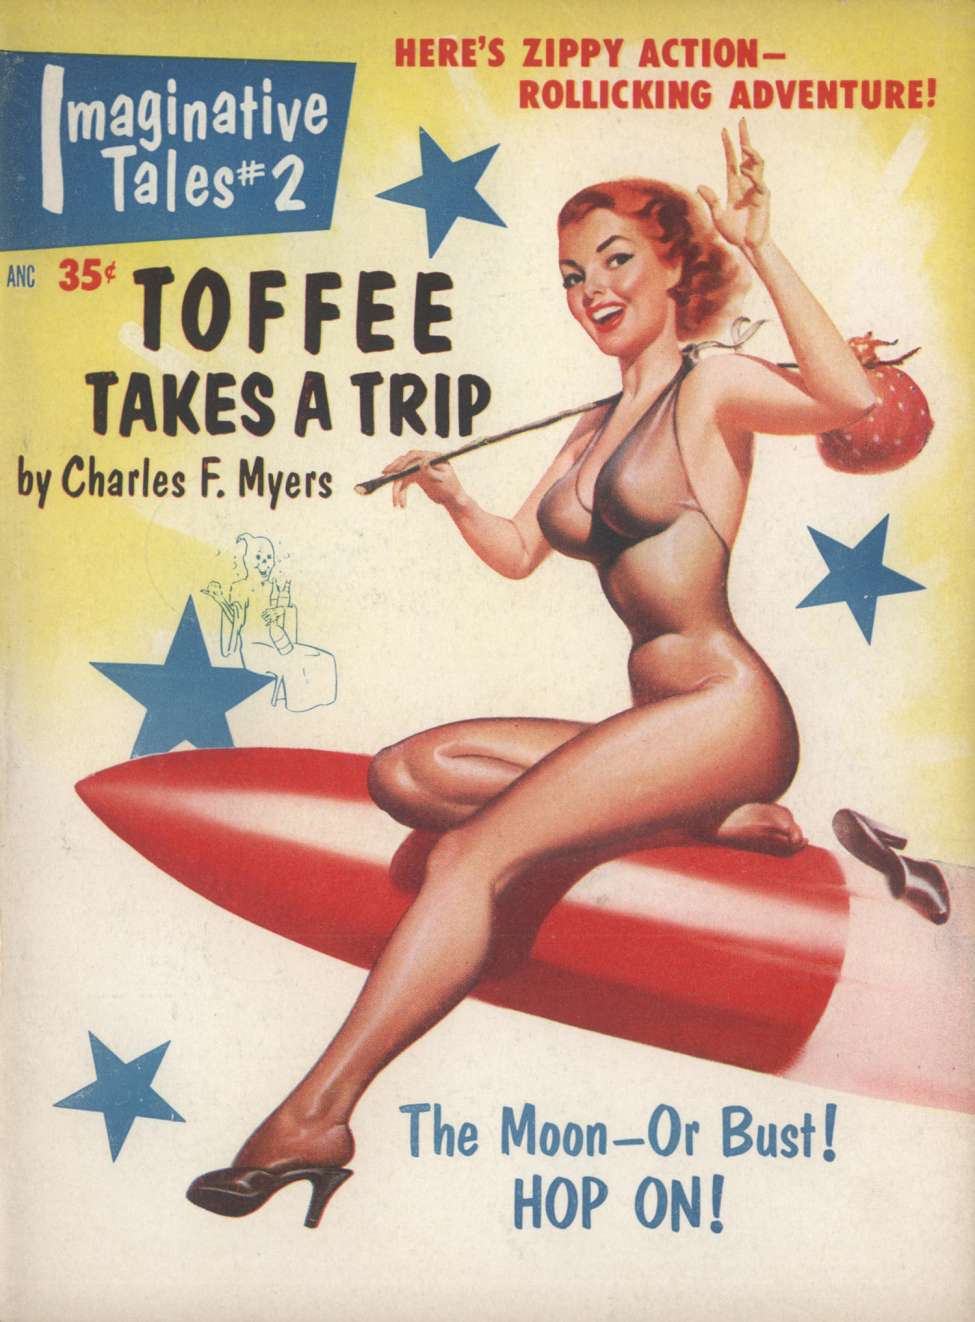 Book Cover For Imaginative Tales v1 2 - Toffee Takes a Trip - Charles F. Myers